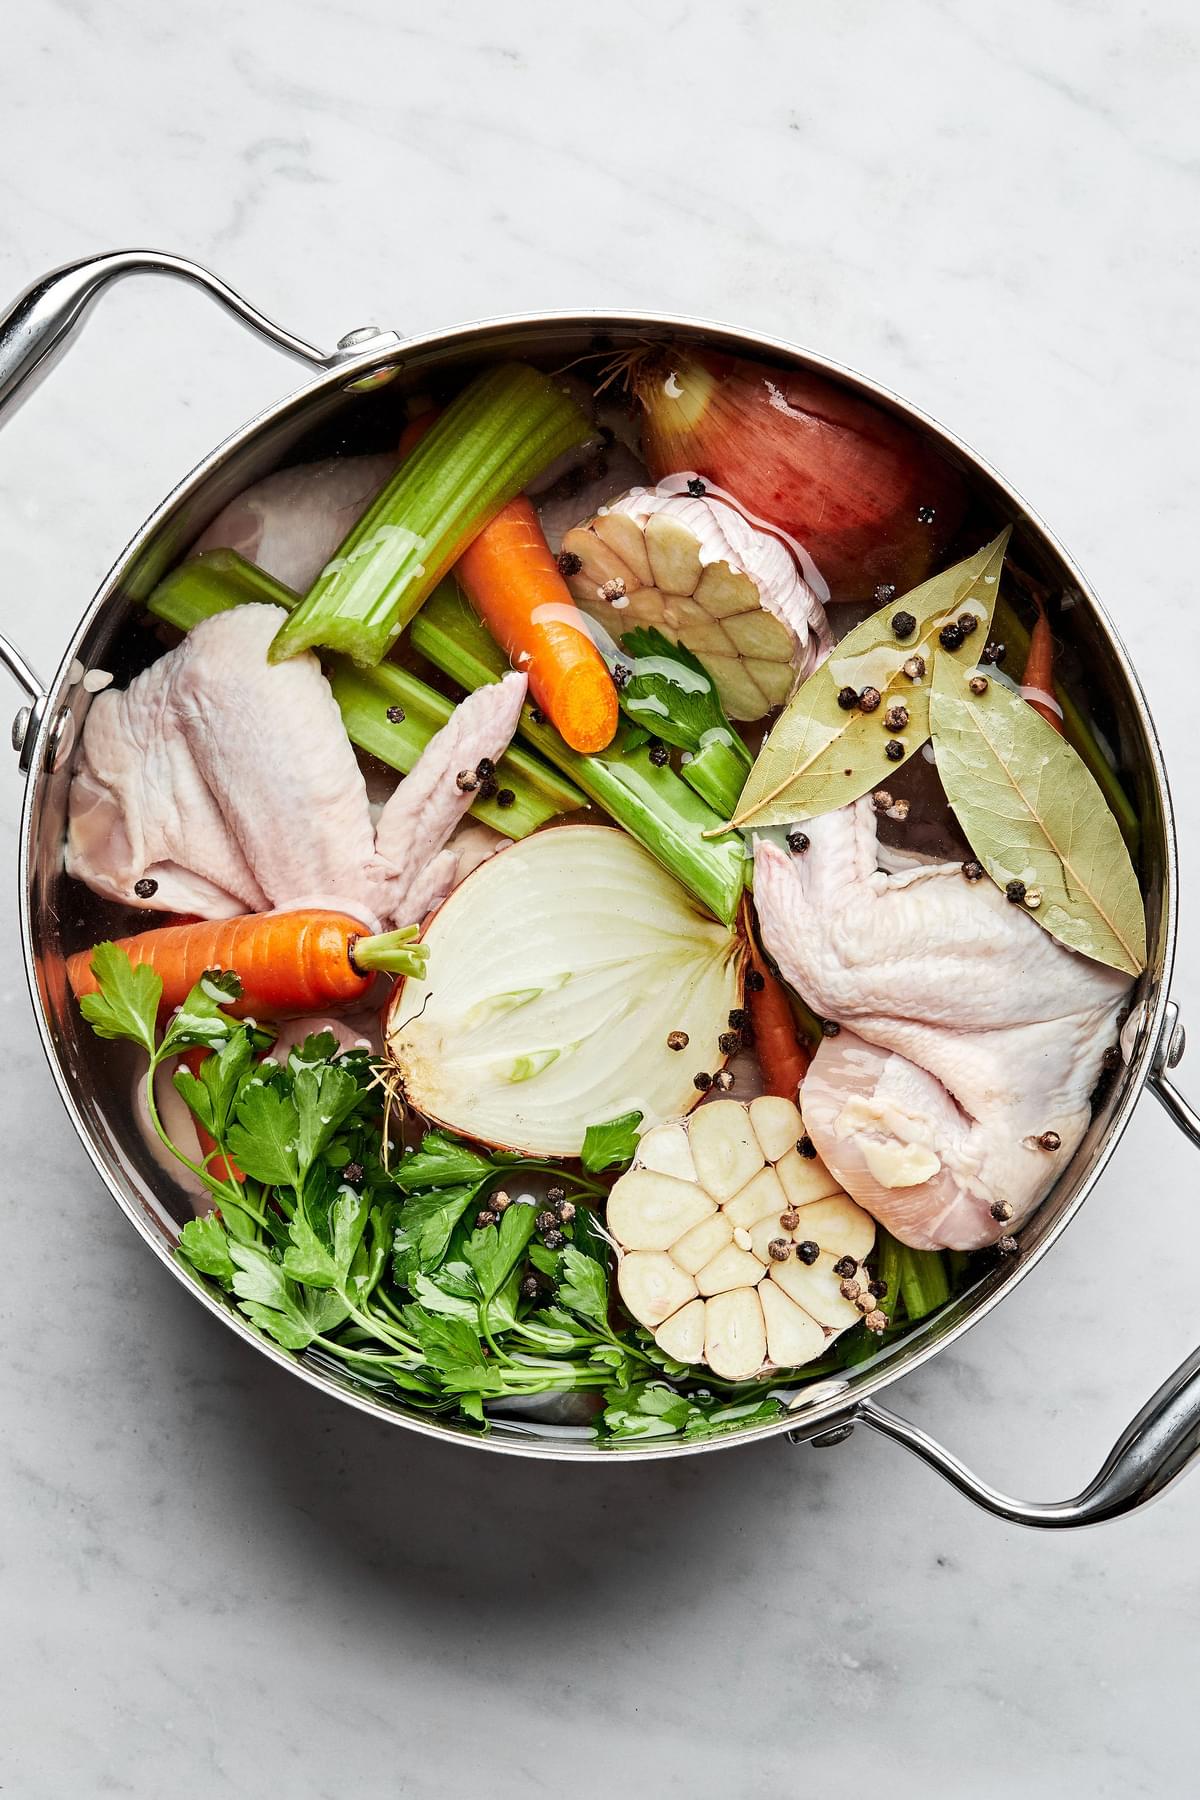 chicken parts, onion, carrot, celery, garlic, herbs and spices in a large pot to make homemade chicken stock